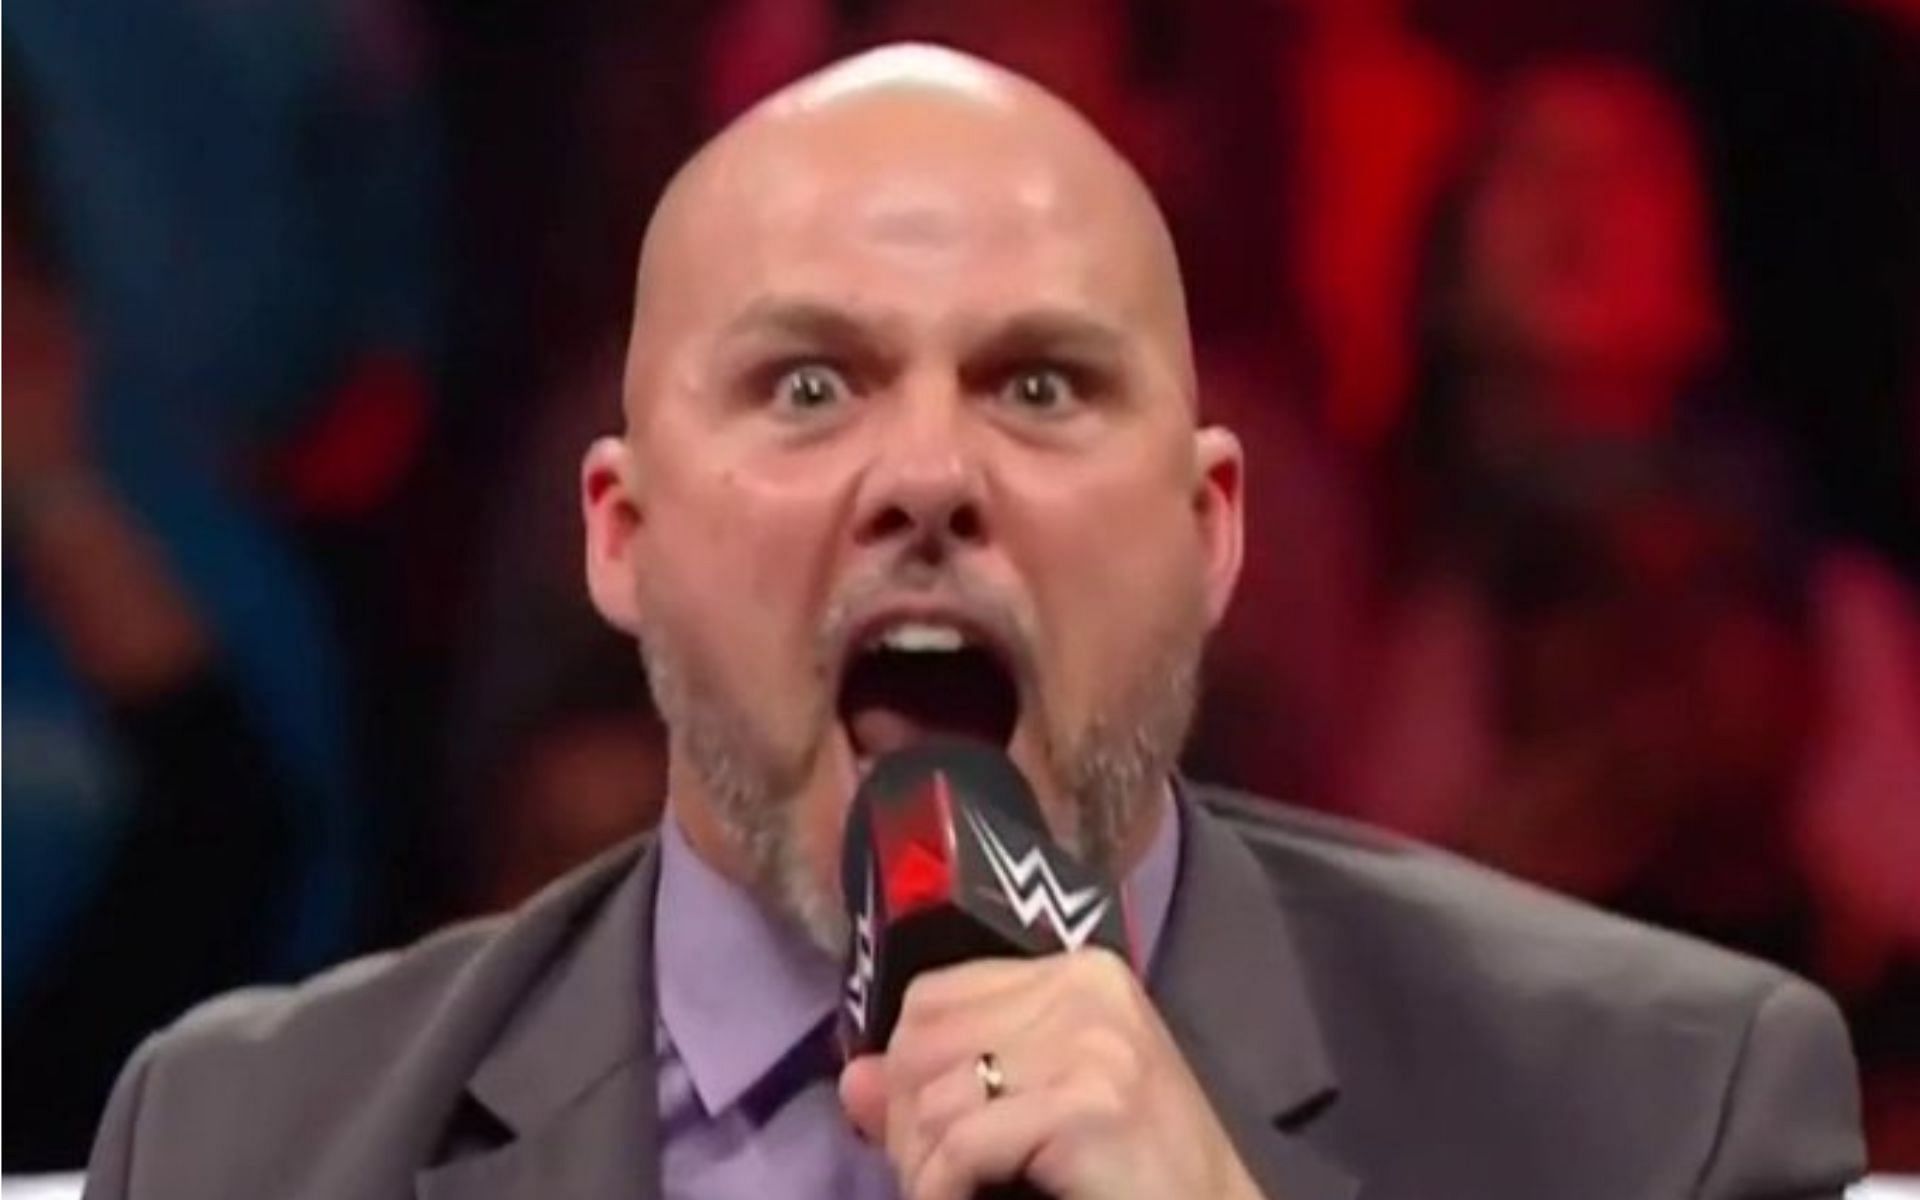 The RAW General Manager was not impressed